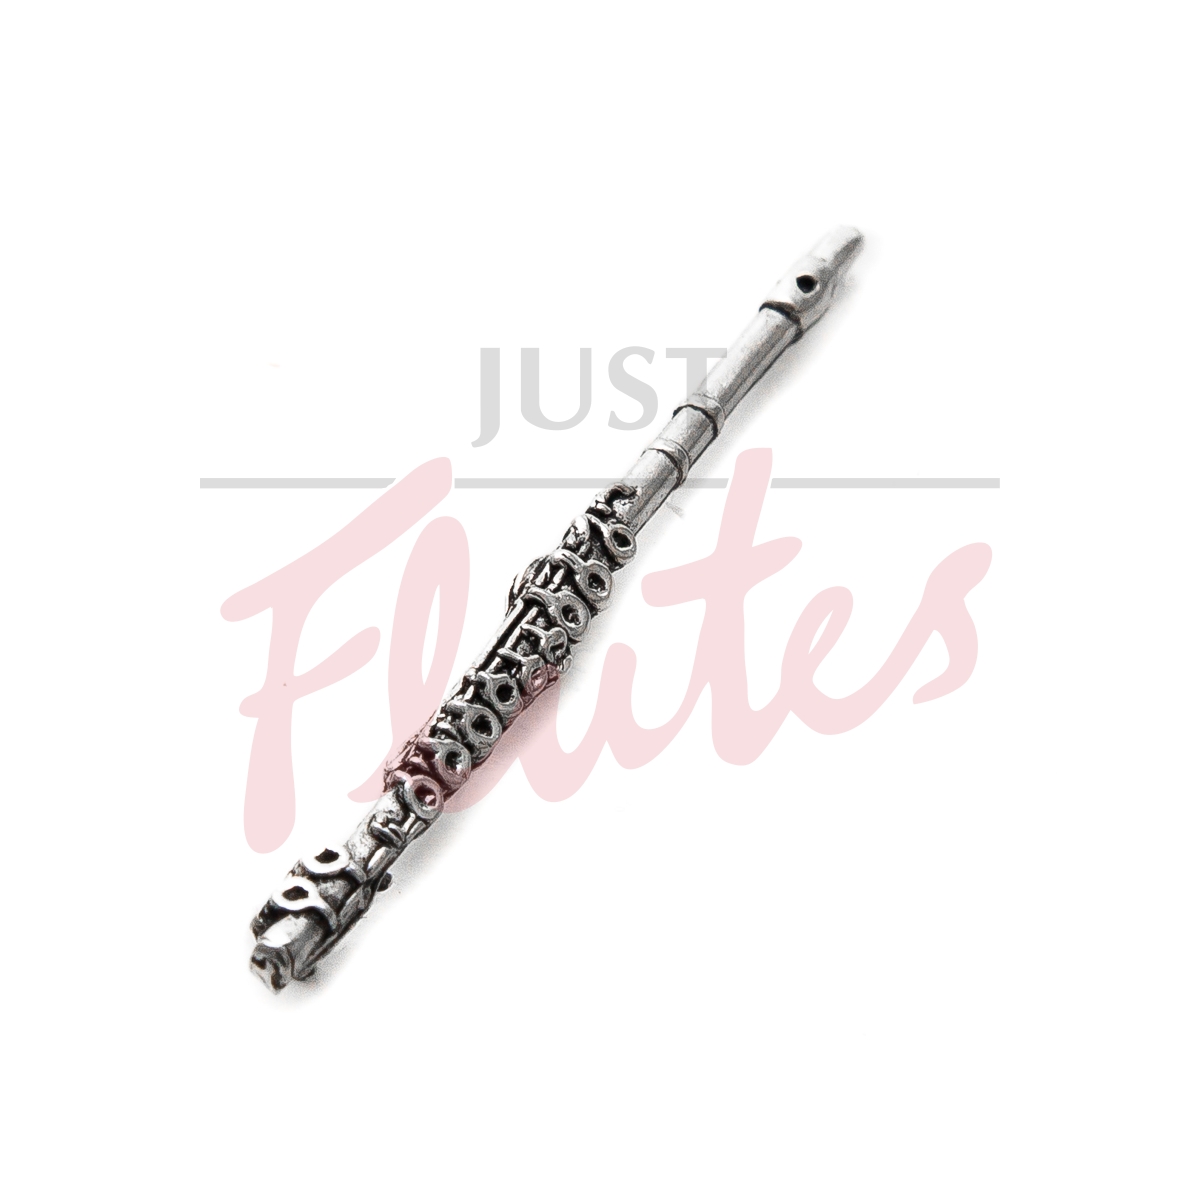 Music Gifts Pewter Flute Pin Badge